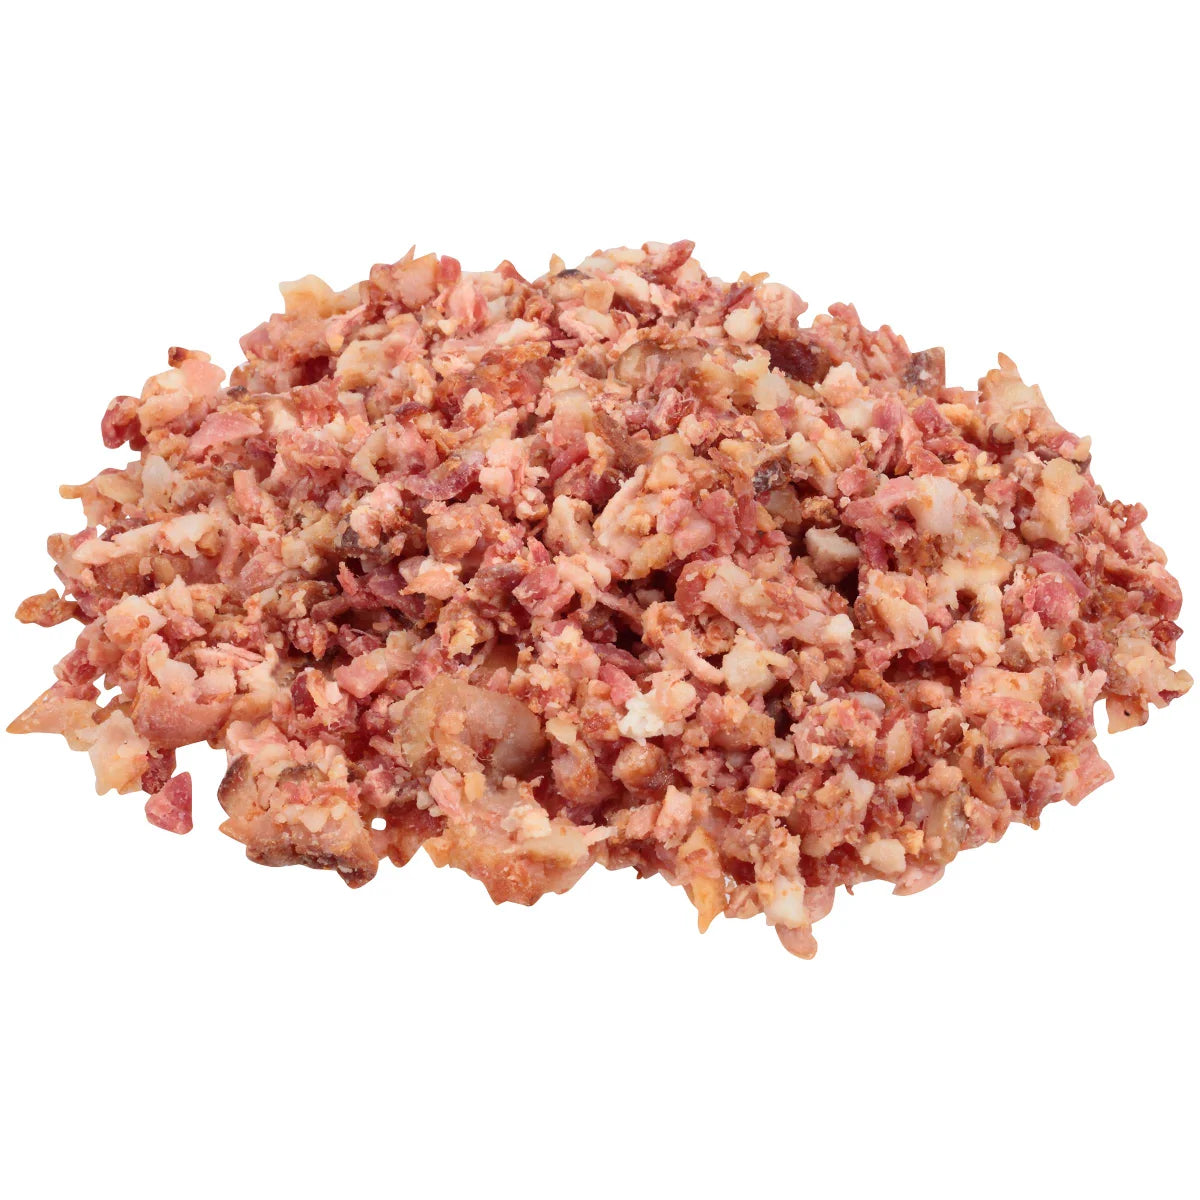 Bacon Pieces - Fully Cooked